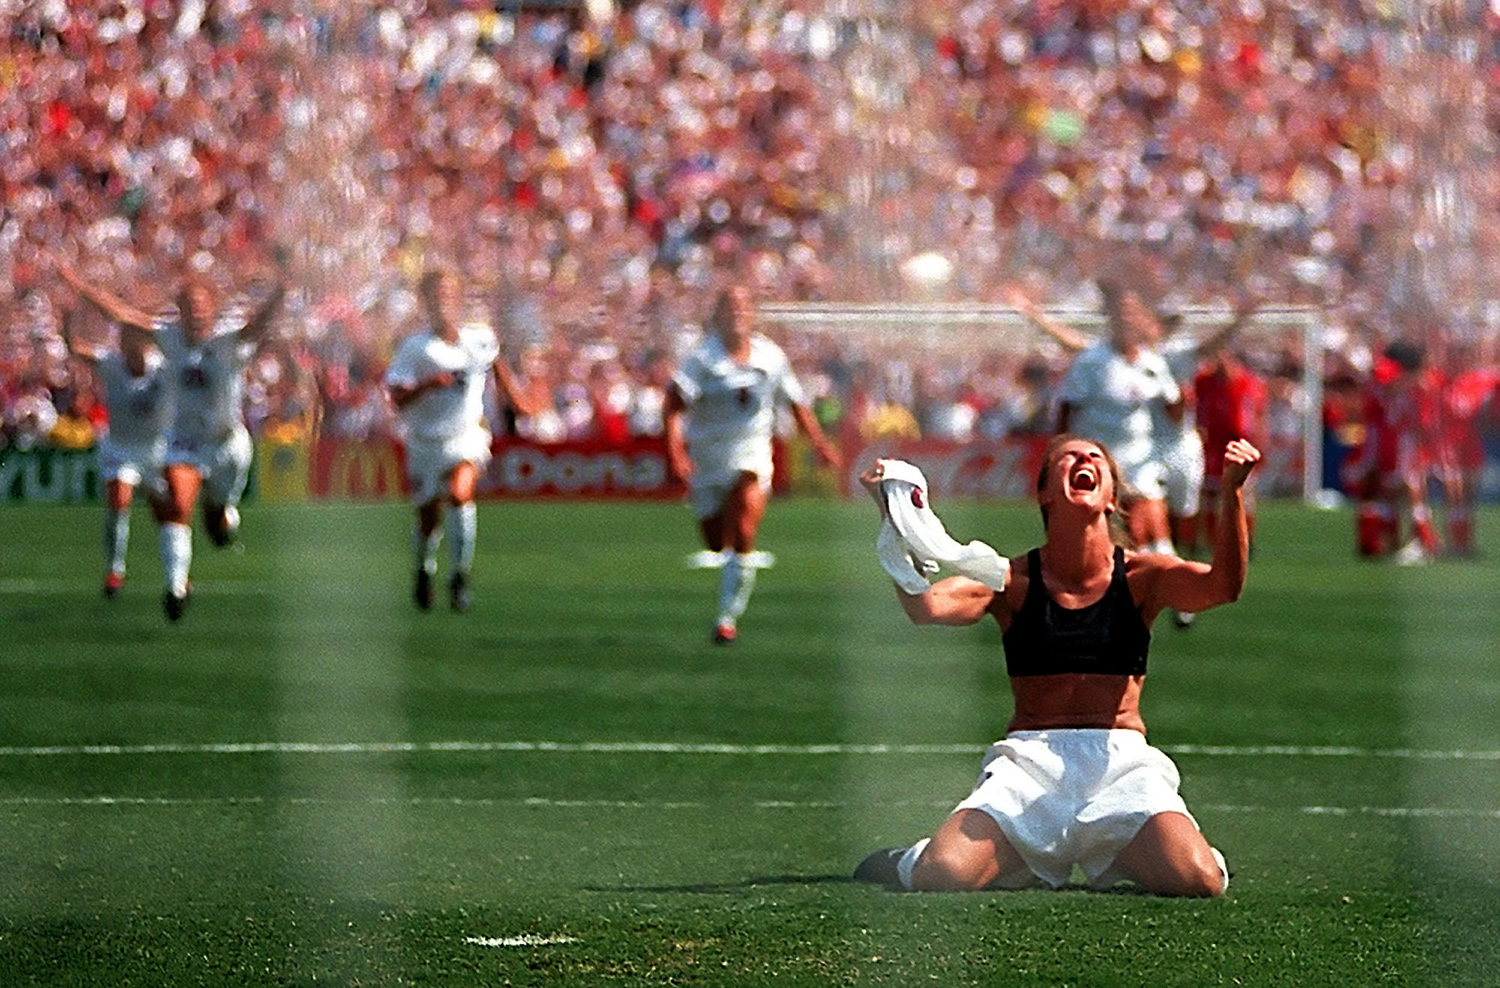 Brandi Chastain cheers on a field while baring her sports bra. Behind, her teammates run to meet her.